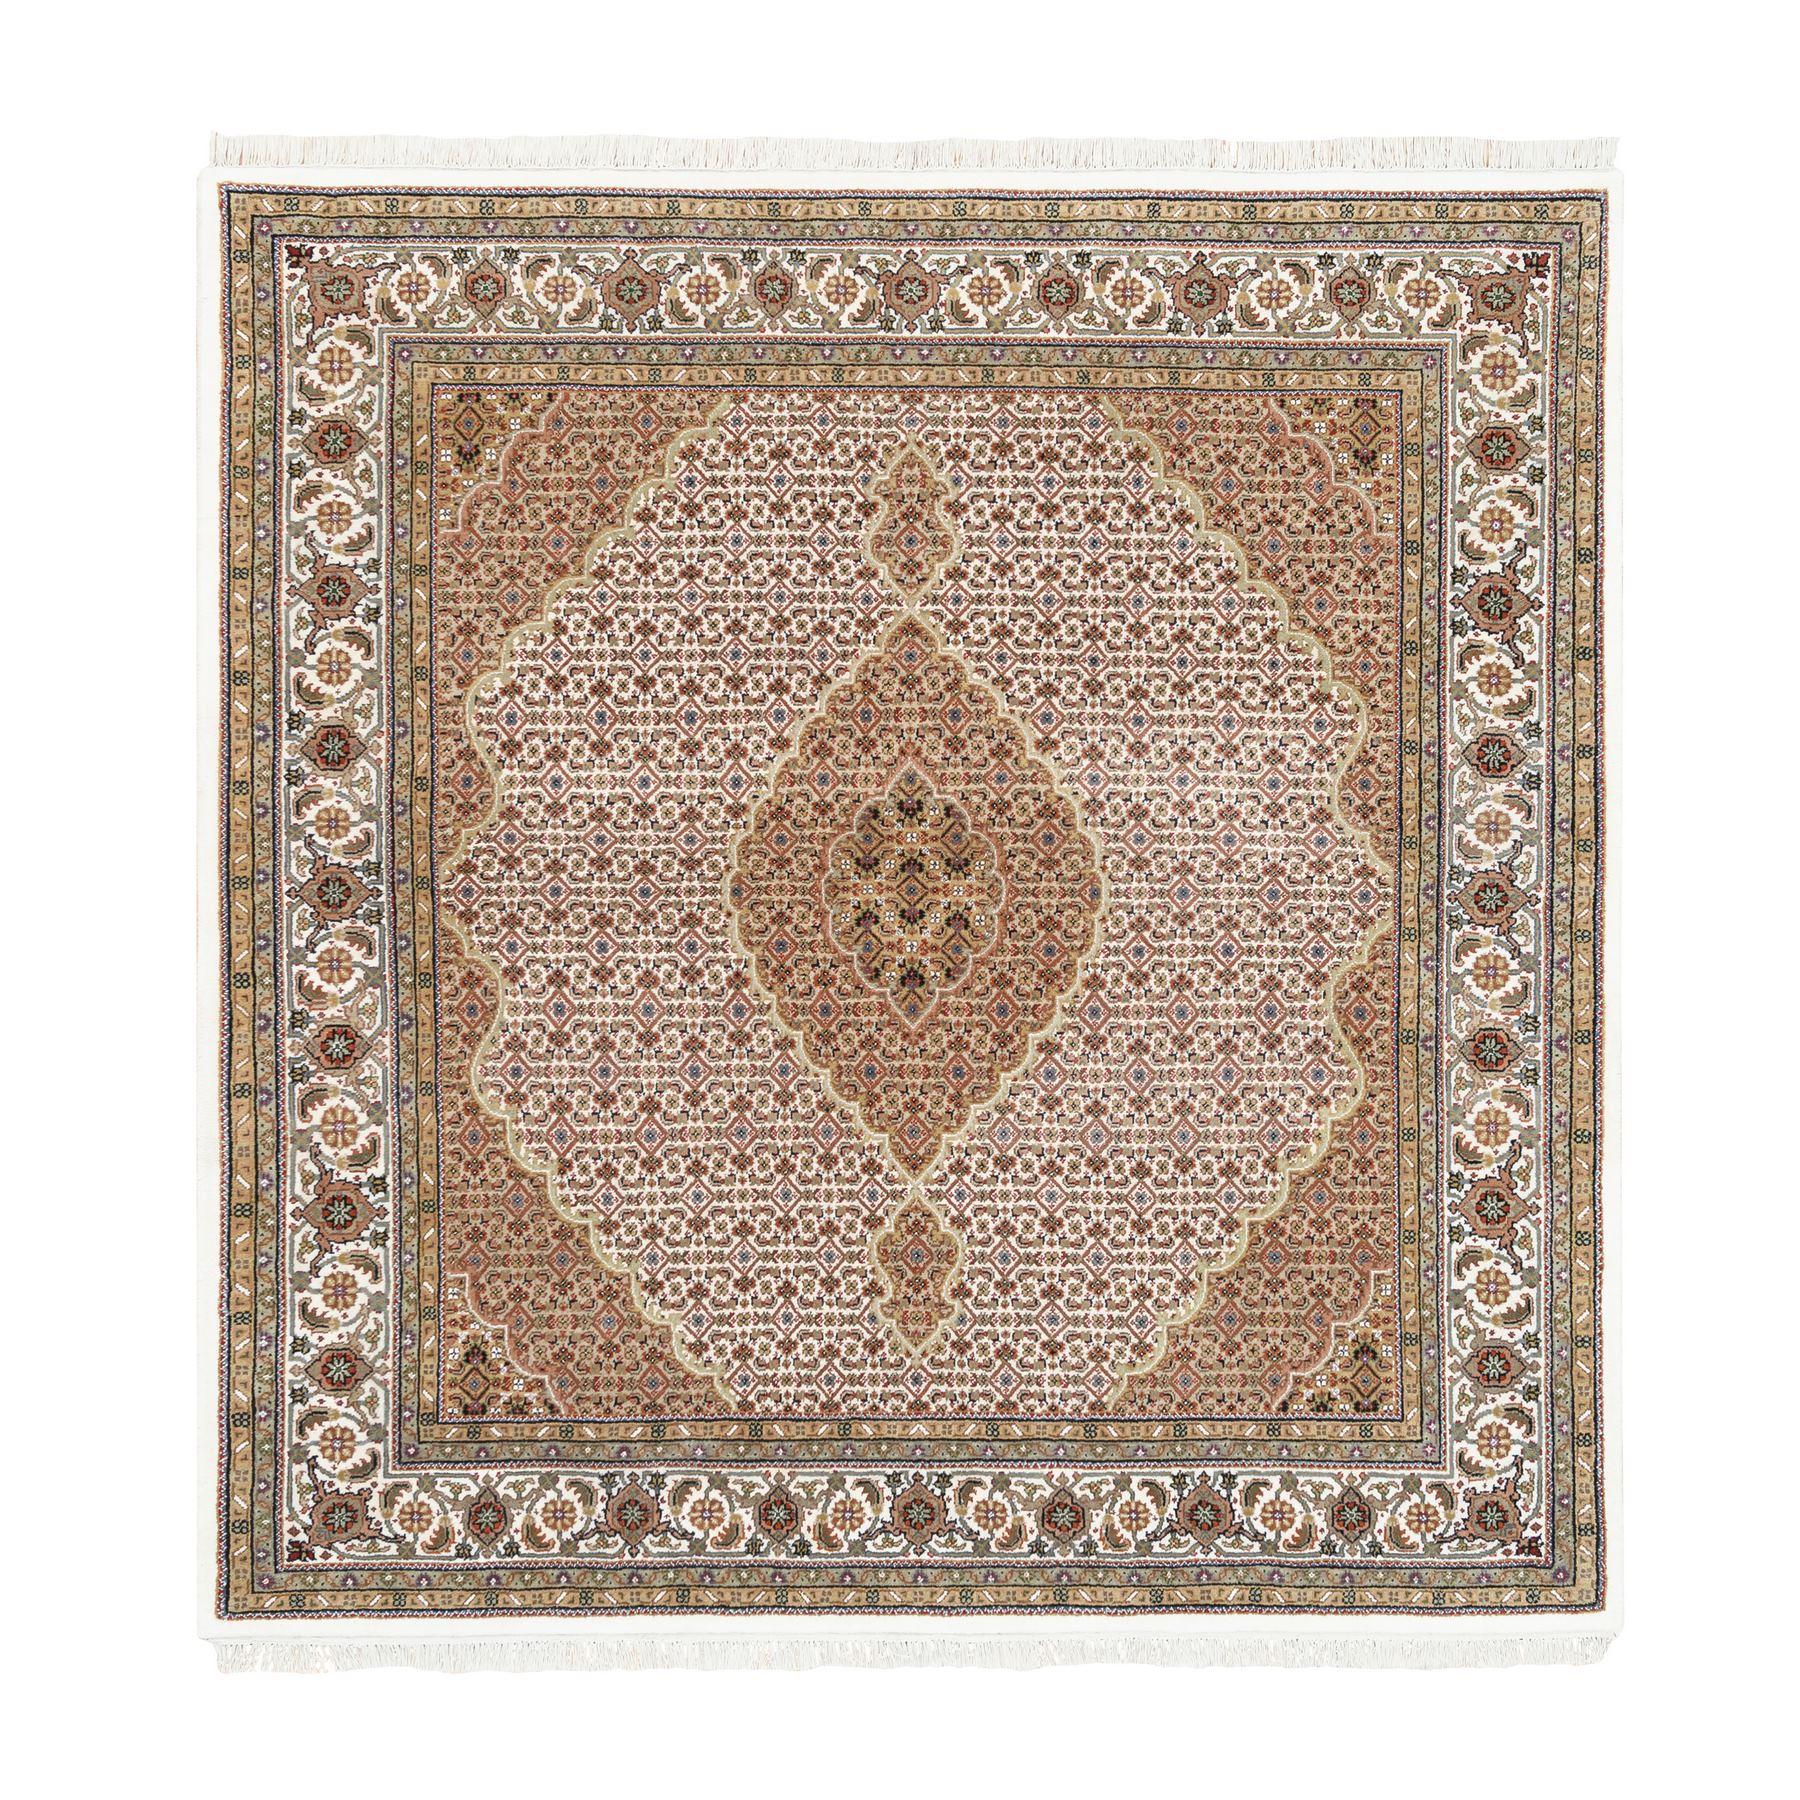 Cream/Ivory/Beige Traditional 5'4 x 5'4 Ft Tabriz Persian Area Rug